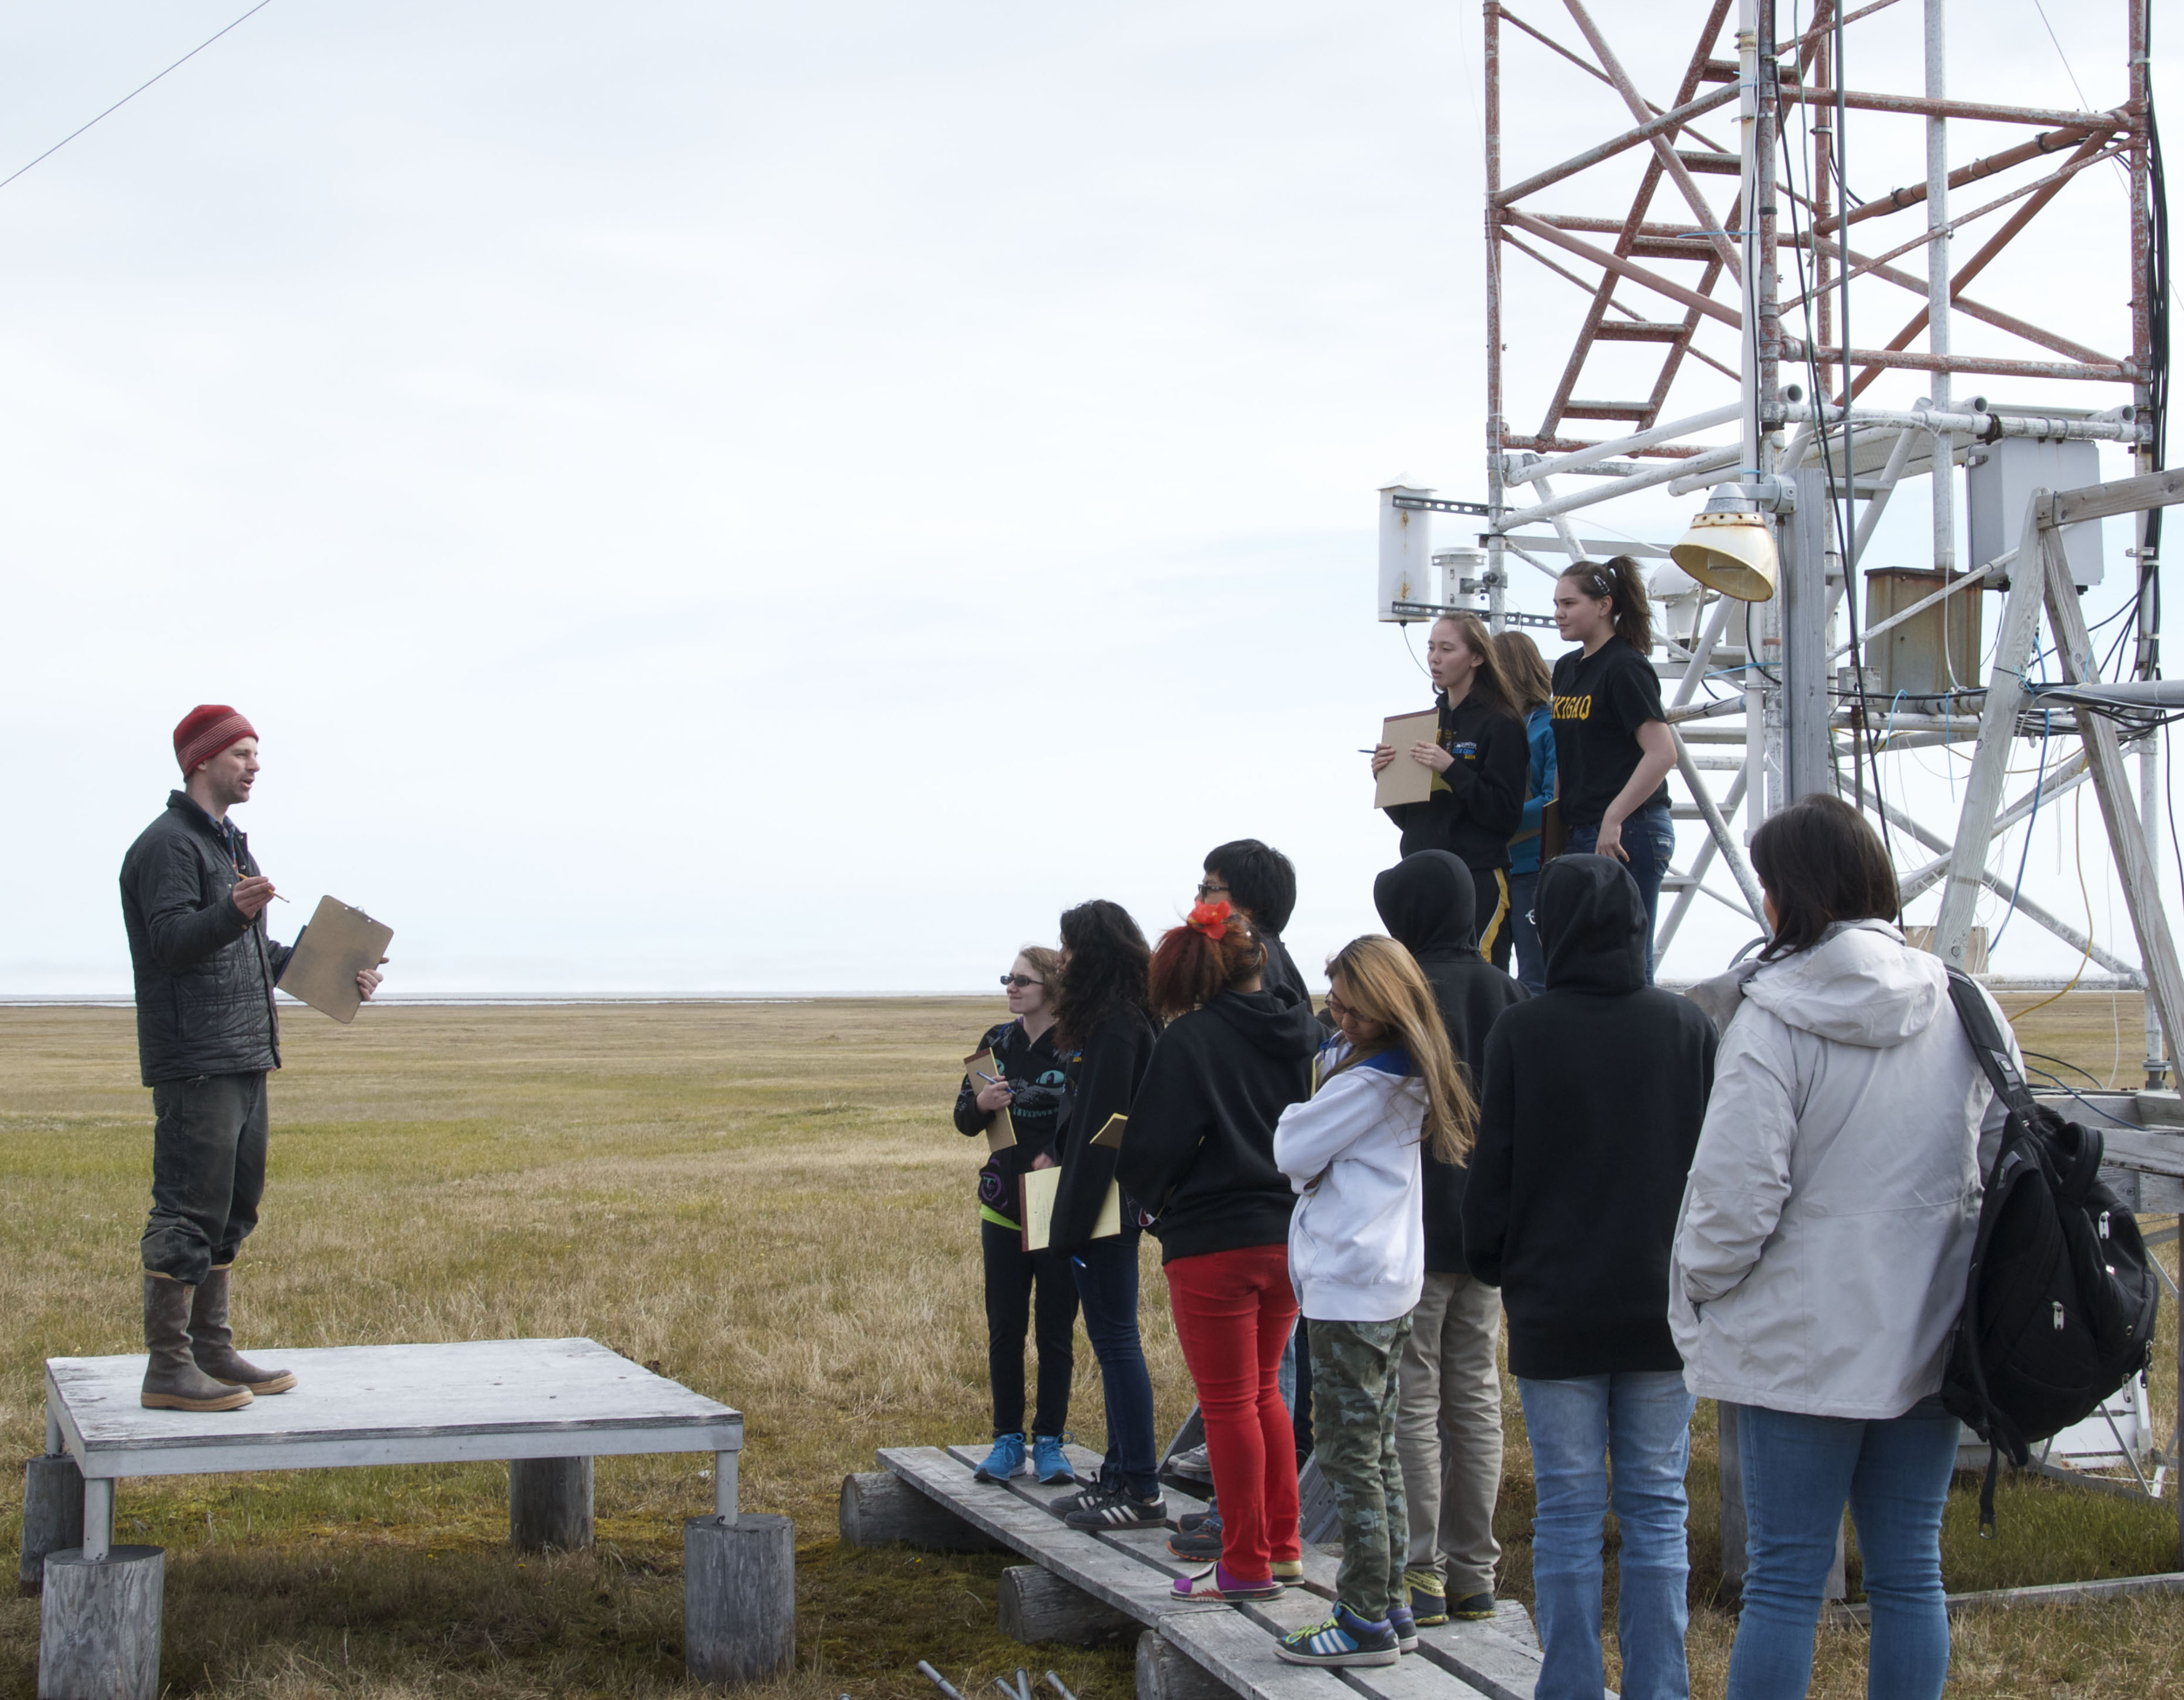 Marty Martinsen, NOAA technician, discusses observatory science with local students.